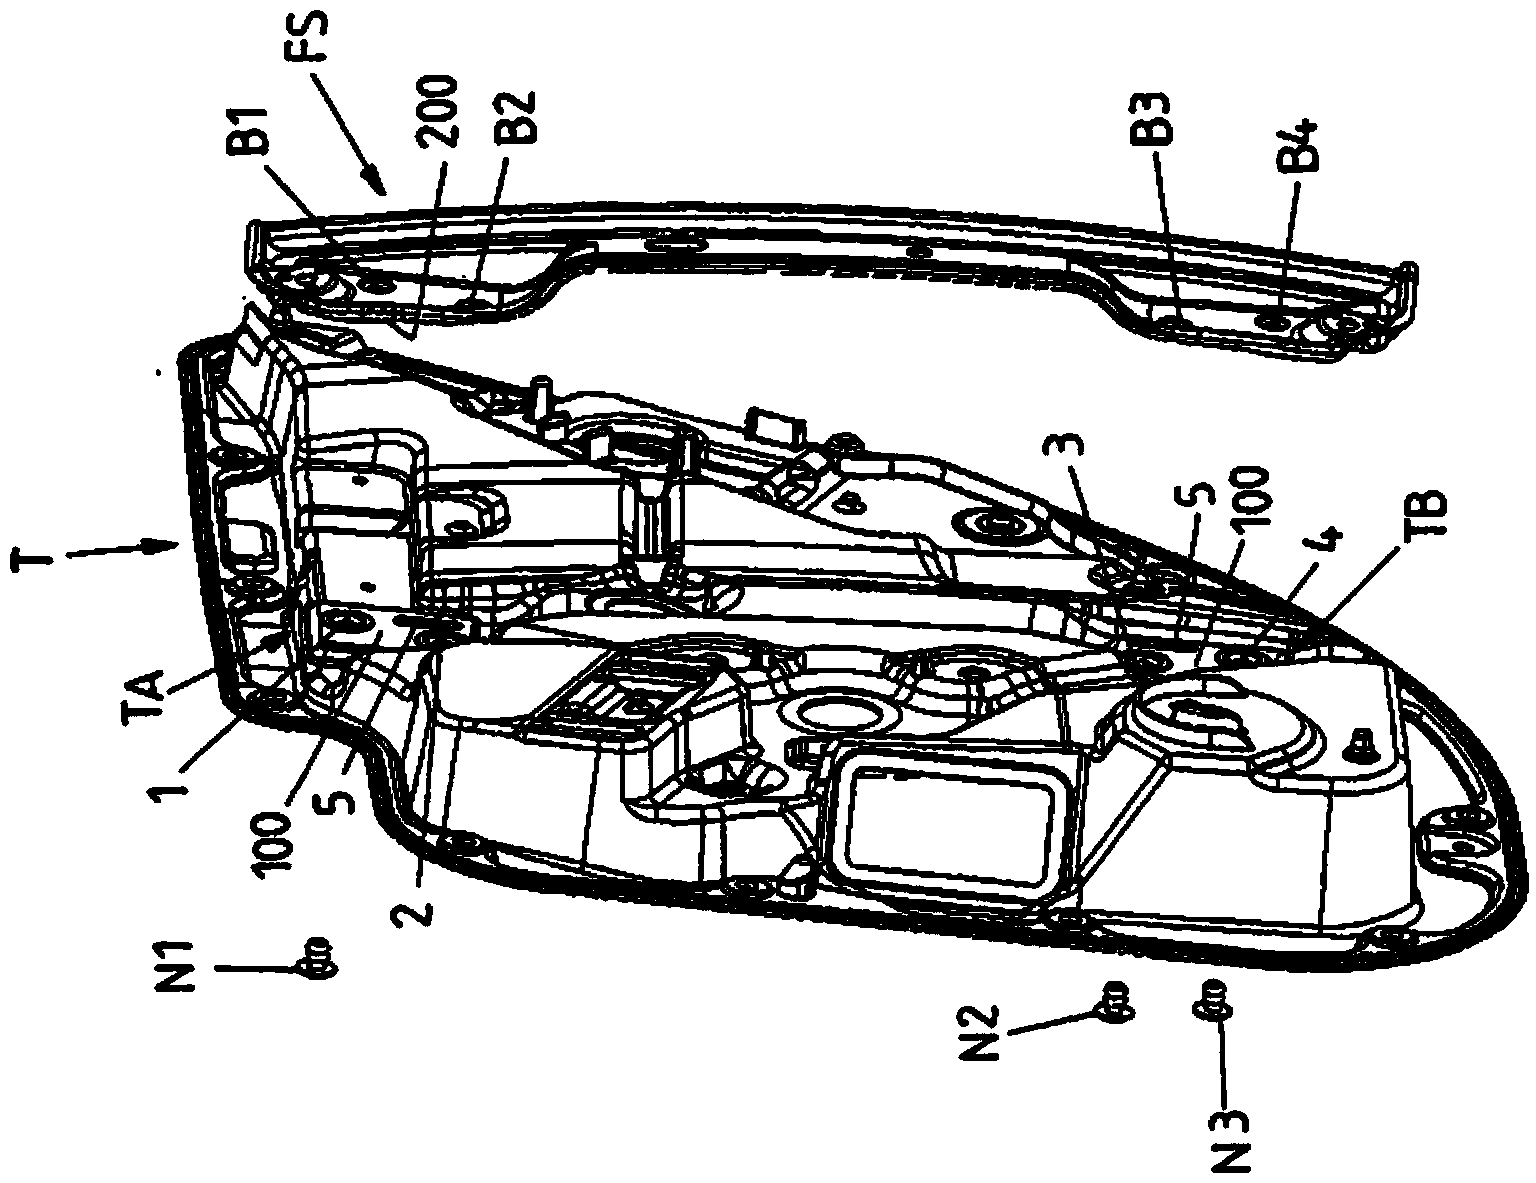 Assembly comprising at least two components that are fixed together